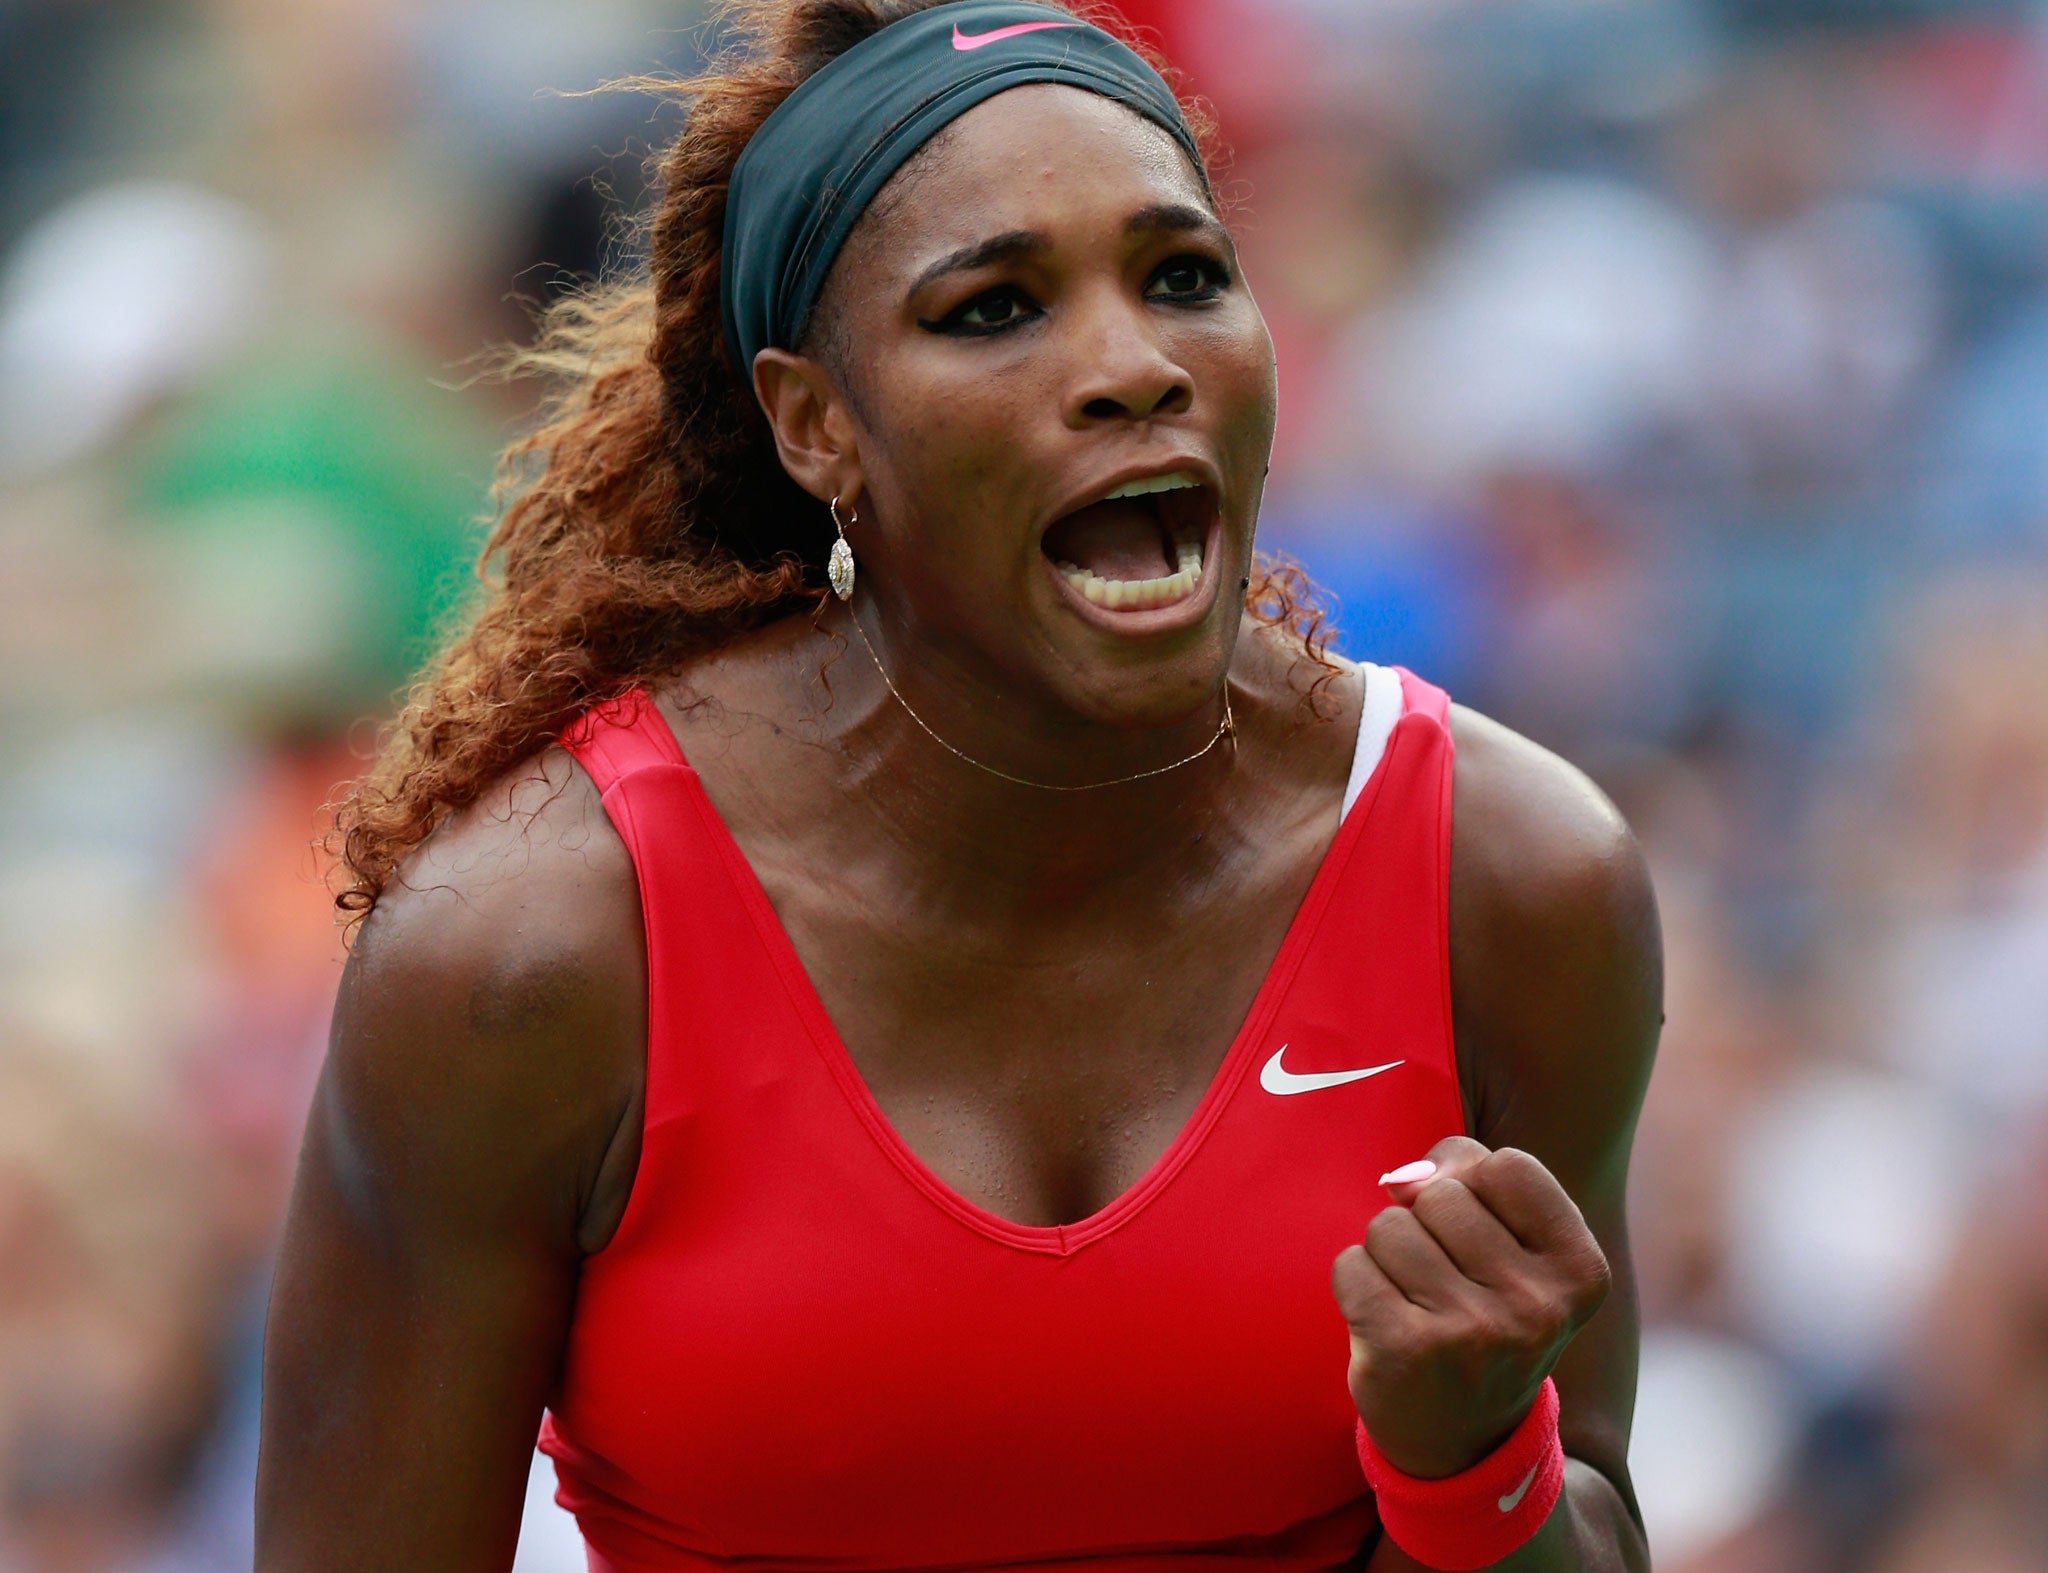 Serena Williams swept past Sloane Stephens and into the quarter-finals of the US Open